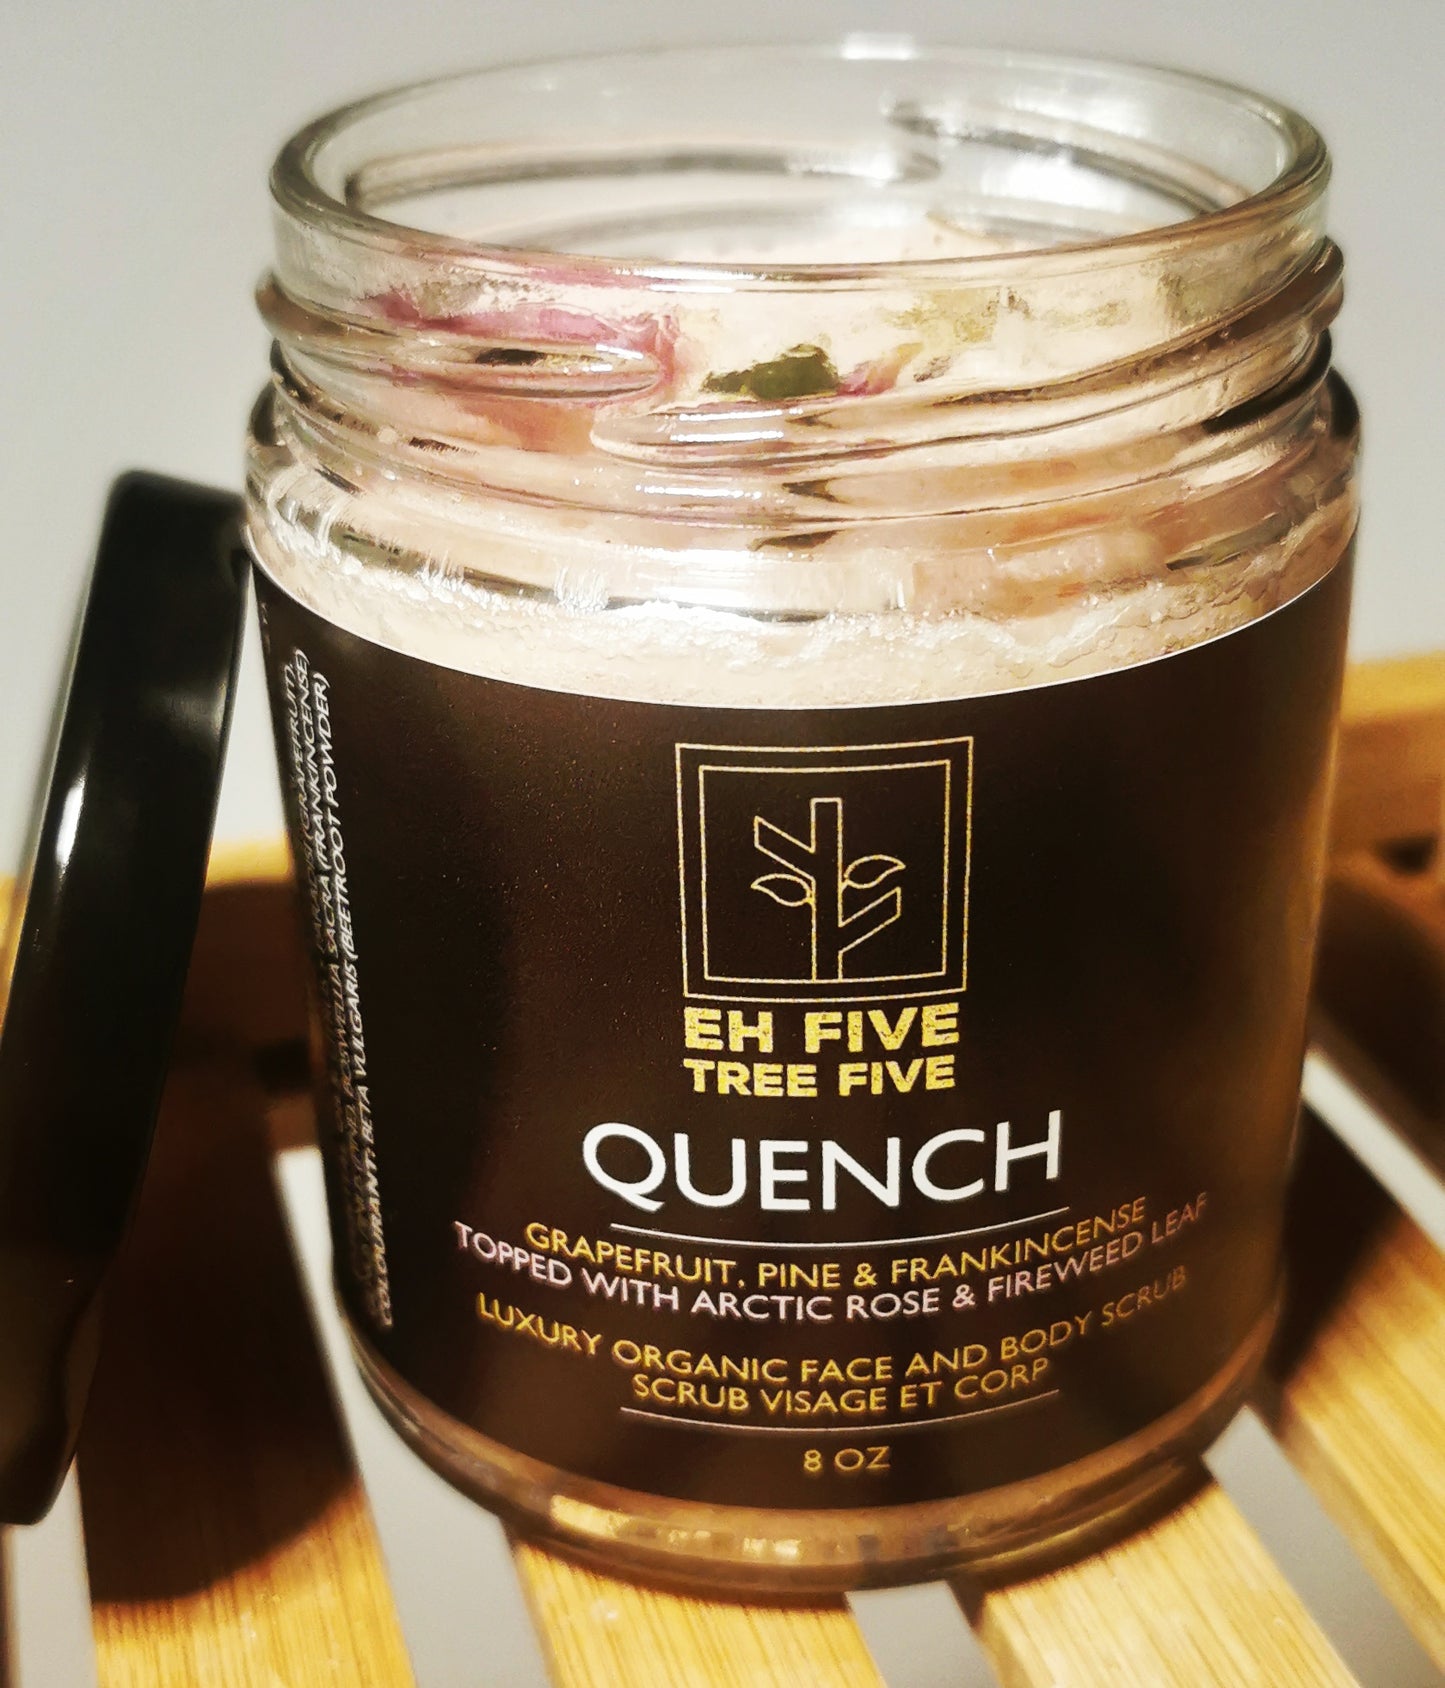 Quench (Grapefruit, Pine and Frankincense) Luxury Face and Body Scrub